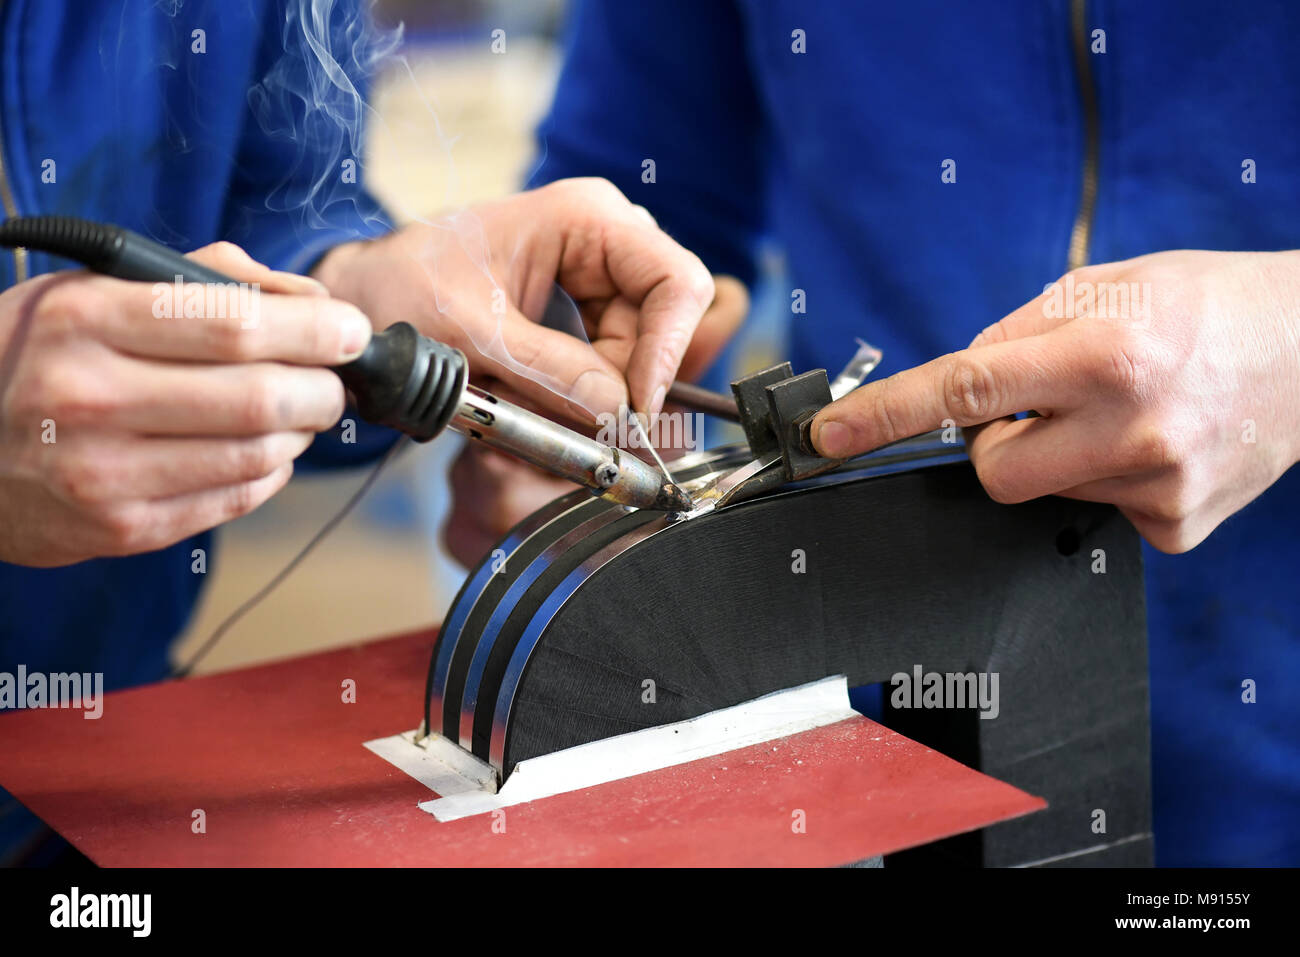 Two blue collar workers soldering electrical transformer in close up Stock Photo